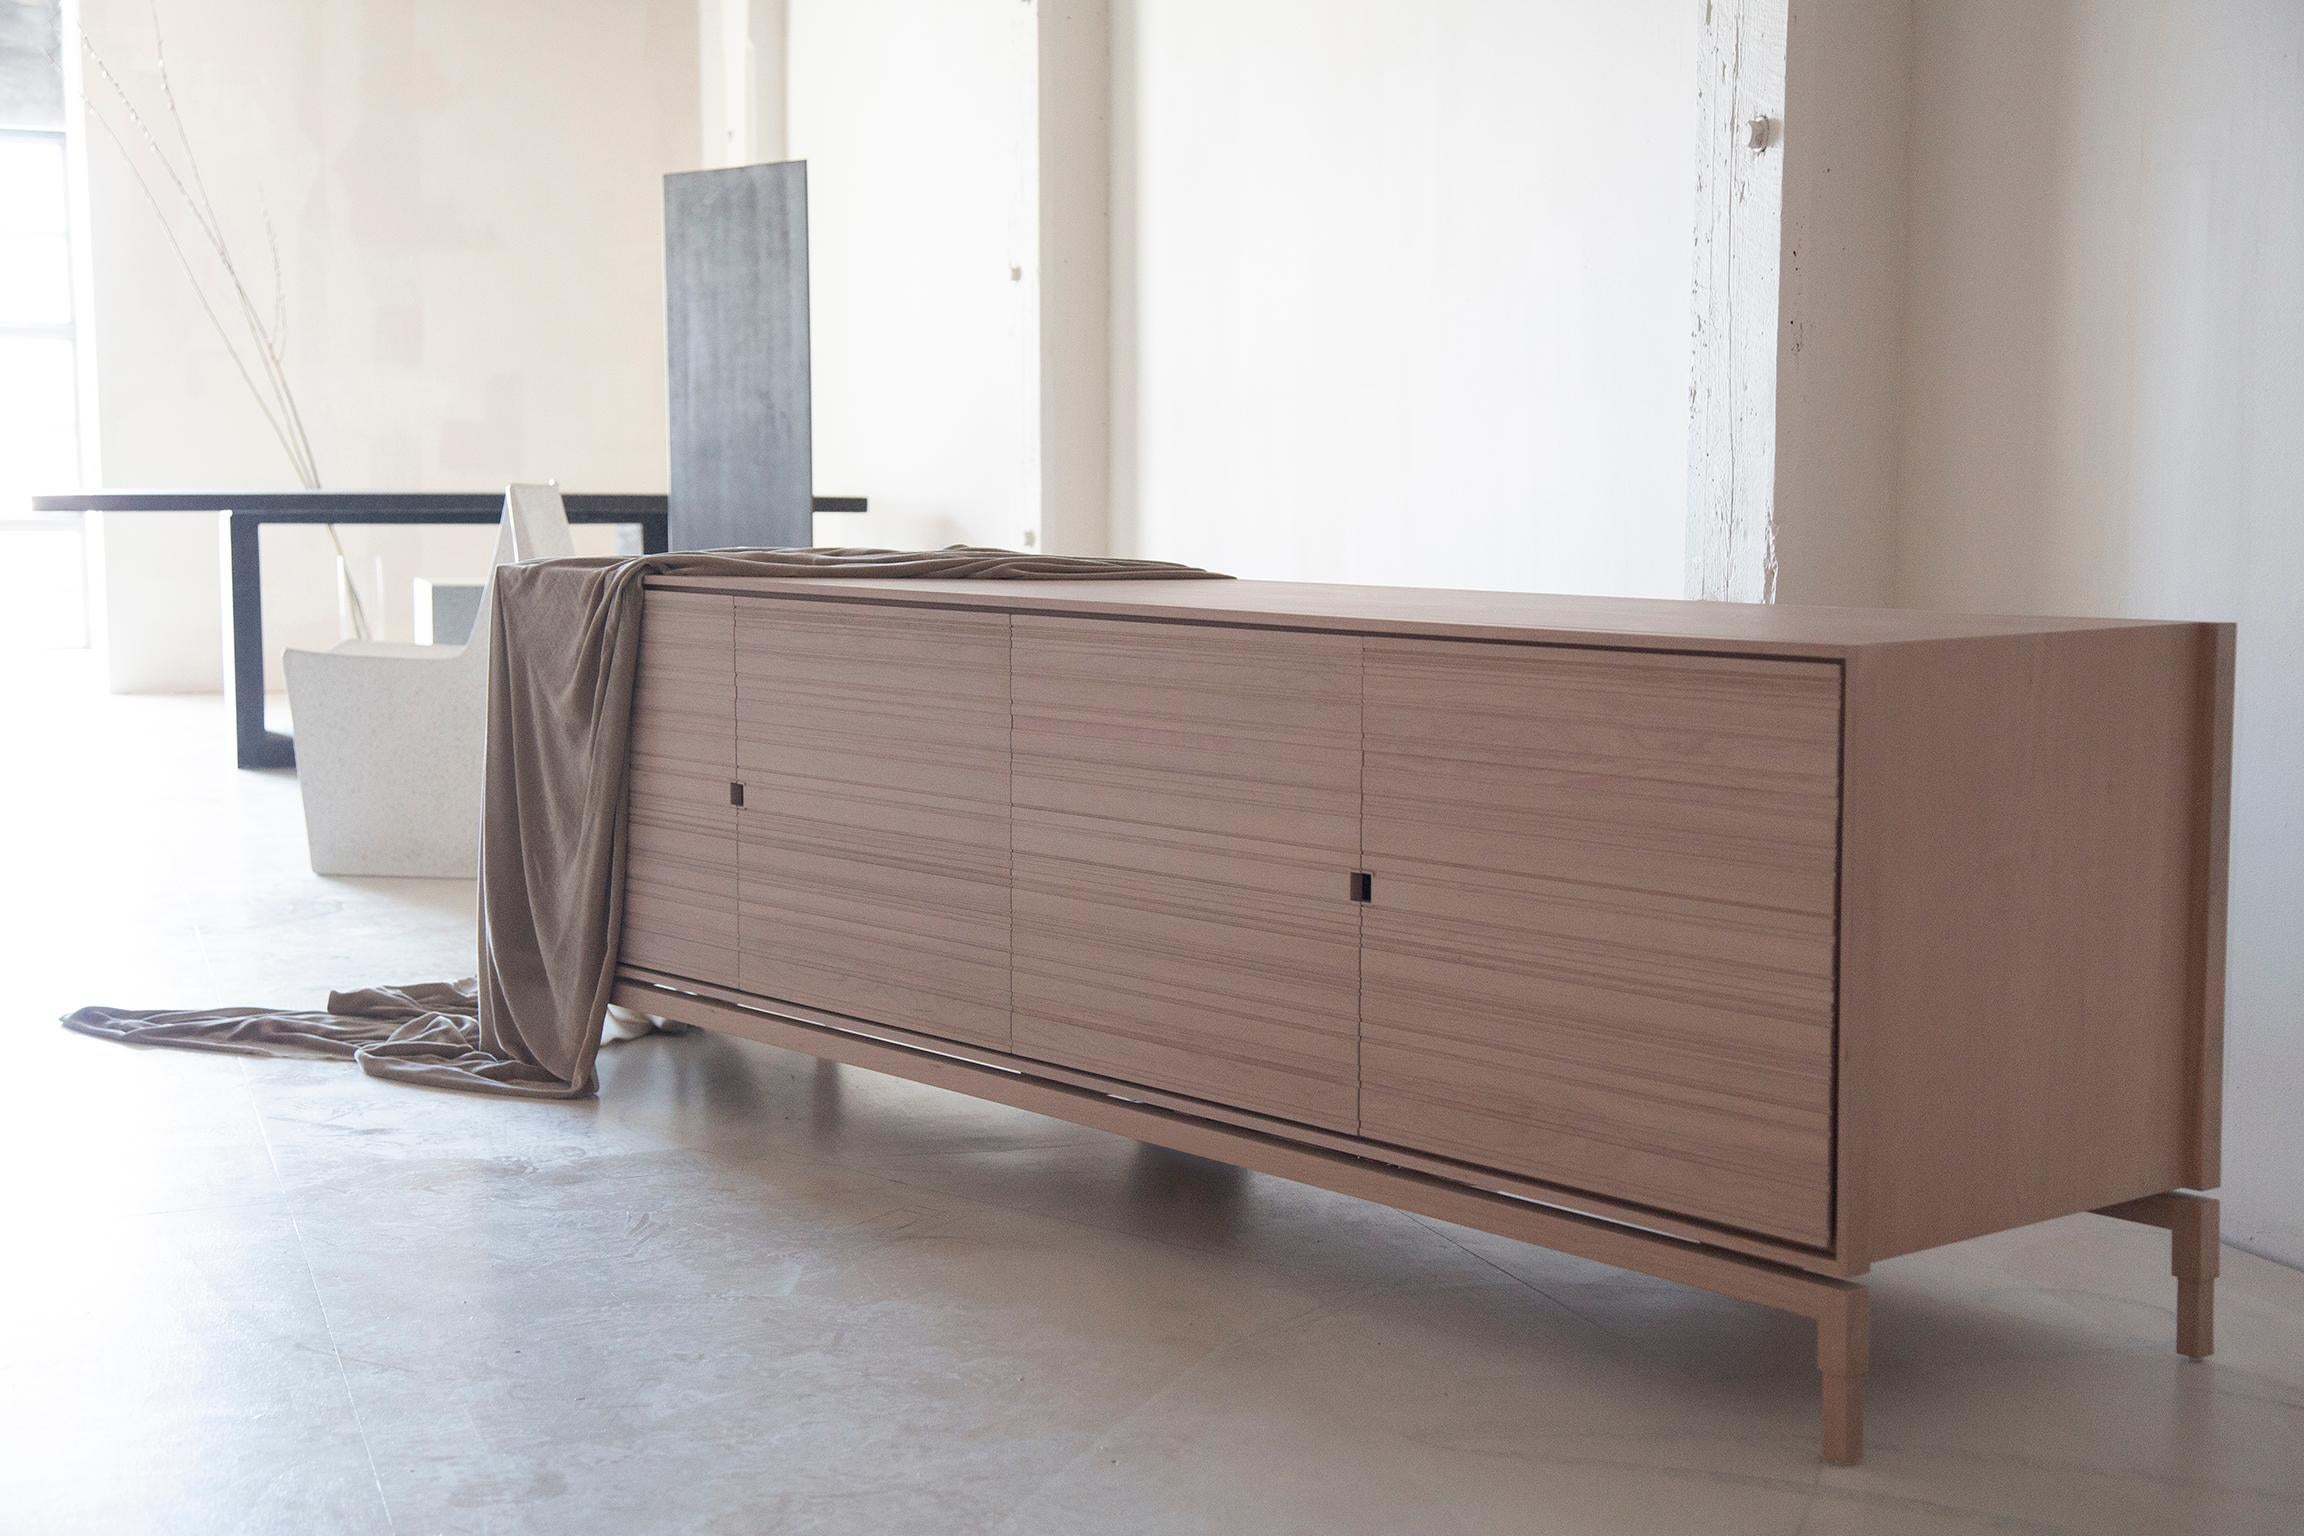 Chicago Credenza in Blush by May Furniture 
Finish: Blush;  Wood: Cherry
Details: 4 cabinet door credenza with hand cut kerf groove door fronts. 
Made in/ships from: Brooklyn, NY 11222
Standard size:  94.5